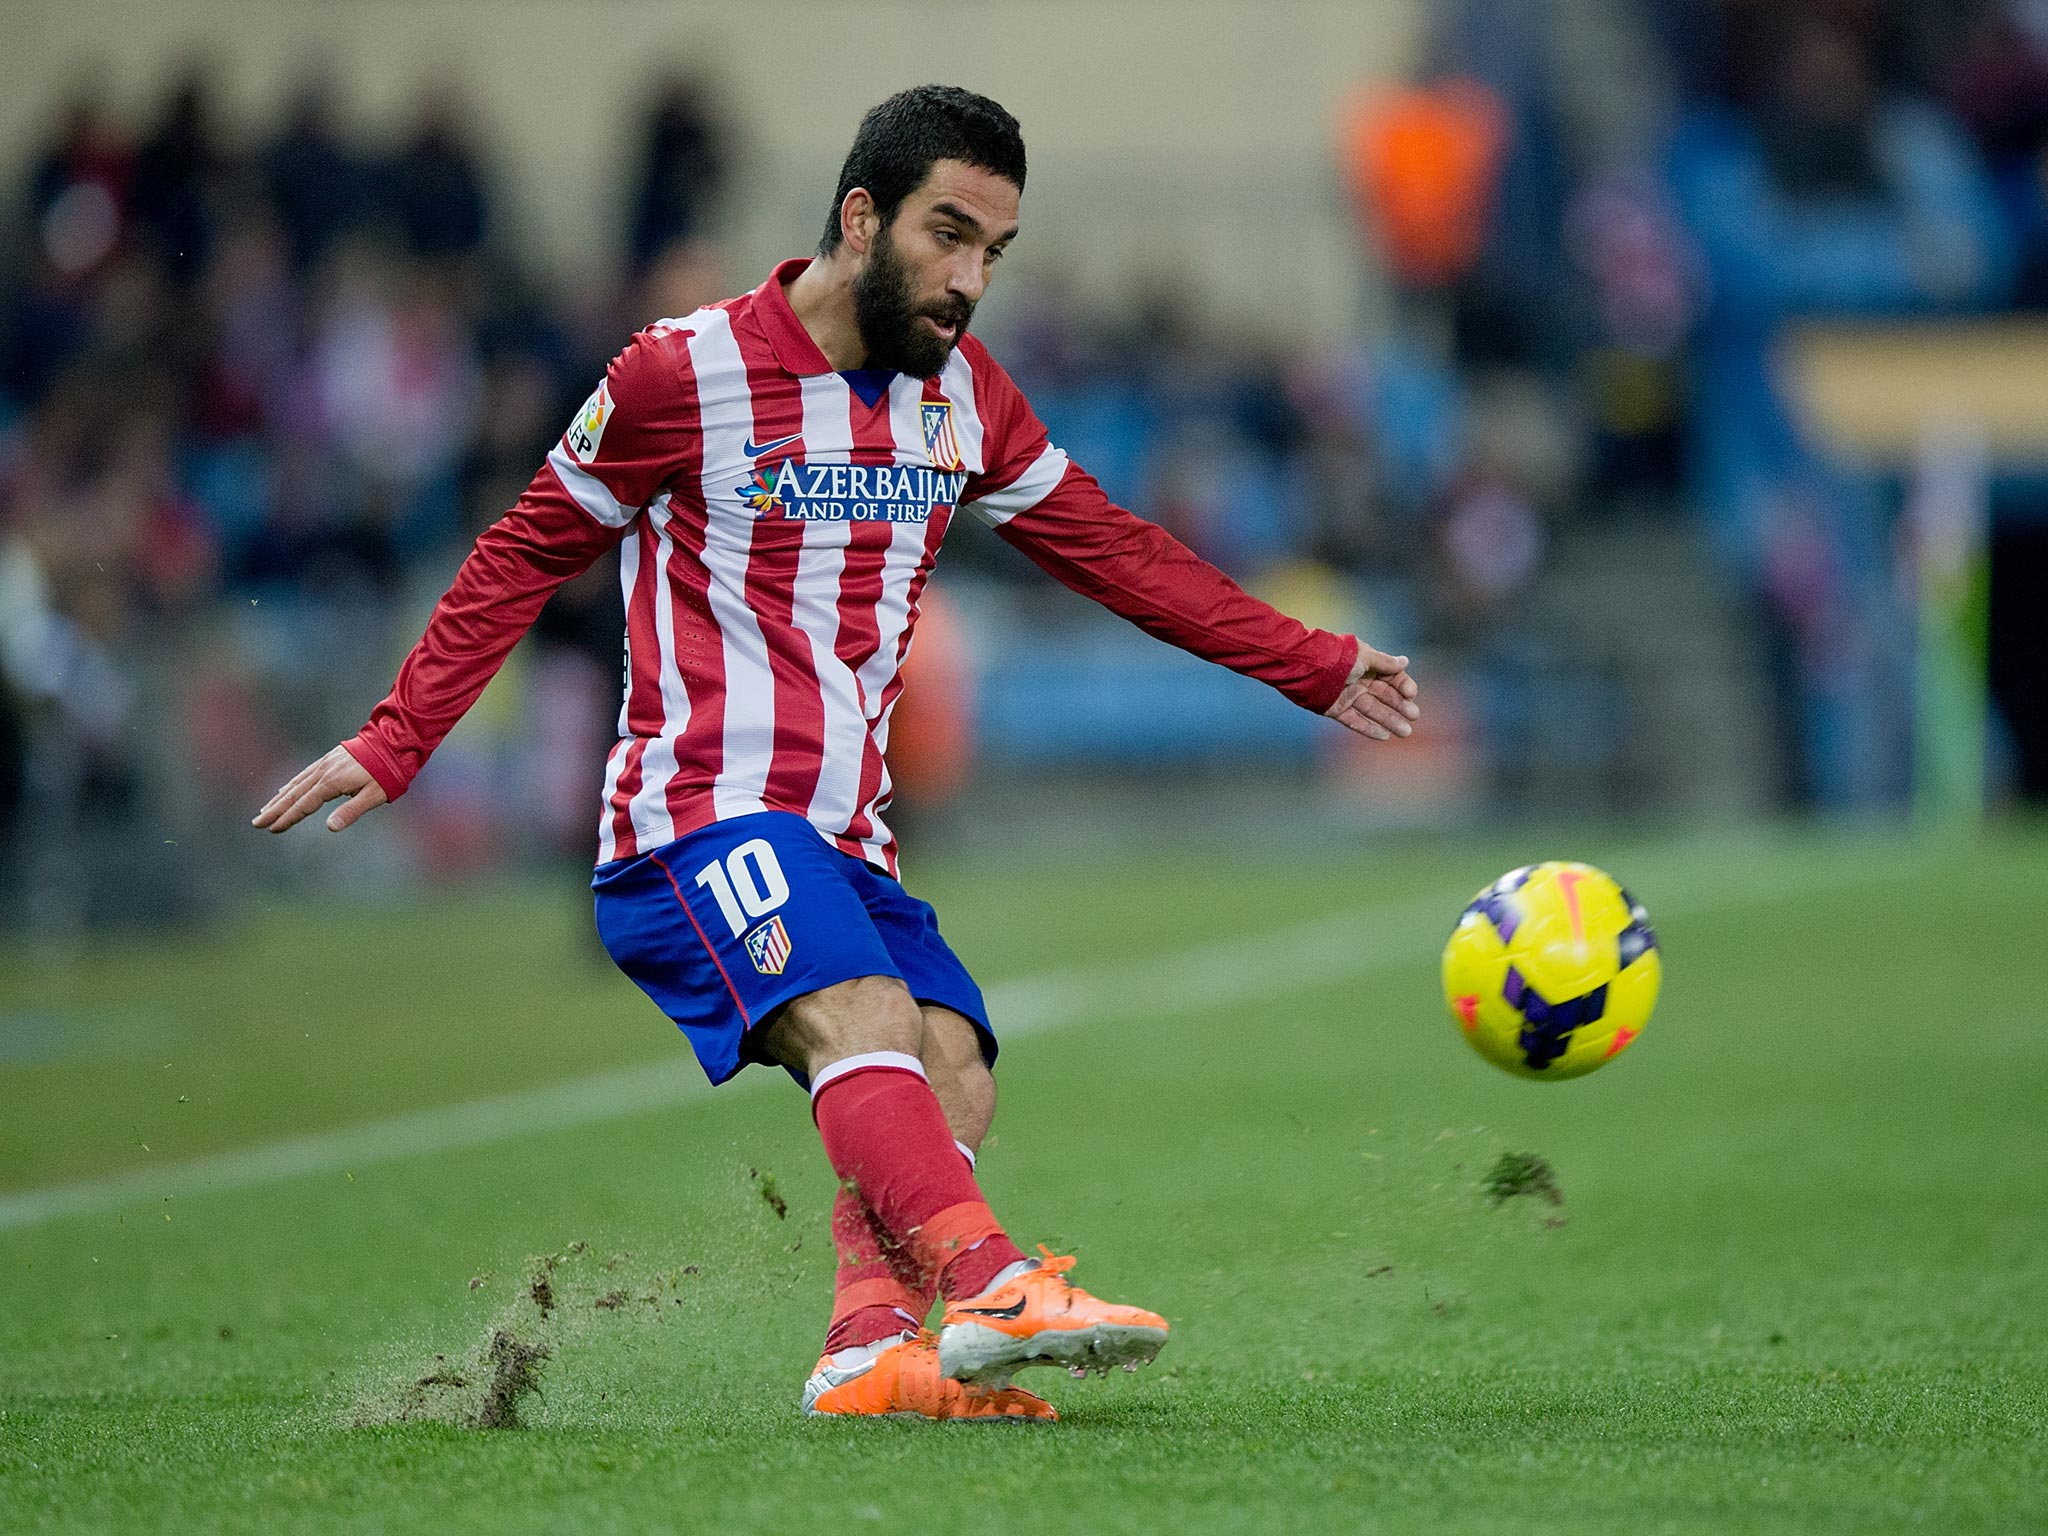 Arda Turan's agent has claimed that the Atletico Madrid winger wants to work under Arsene Wenger with Arsenal